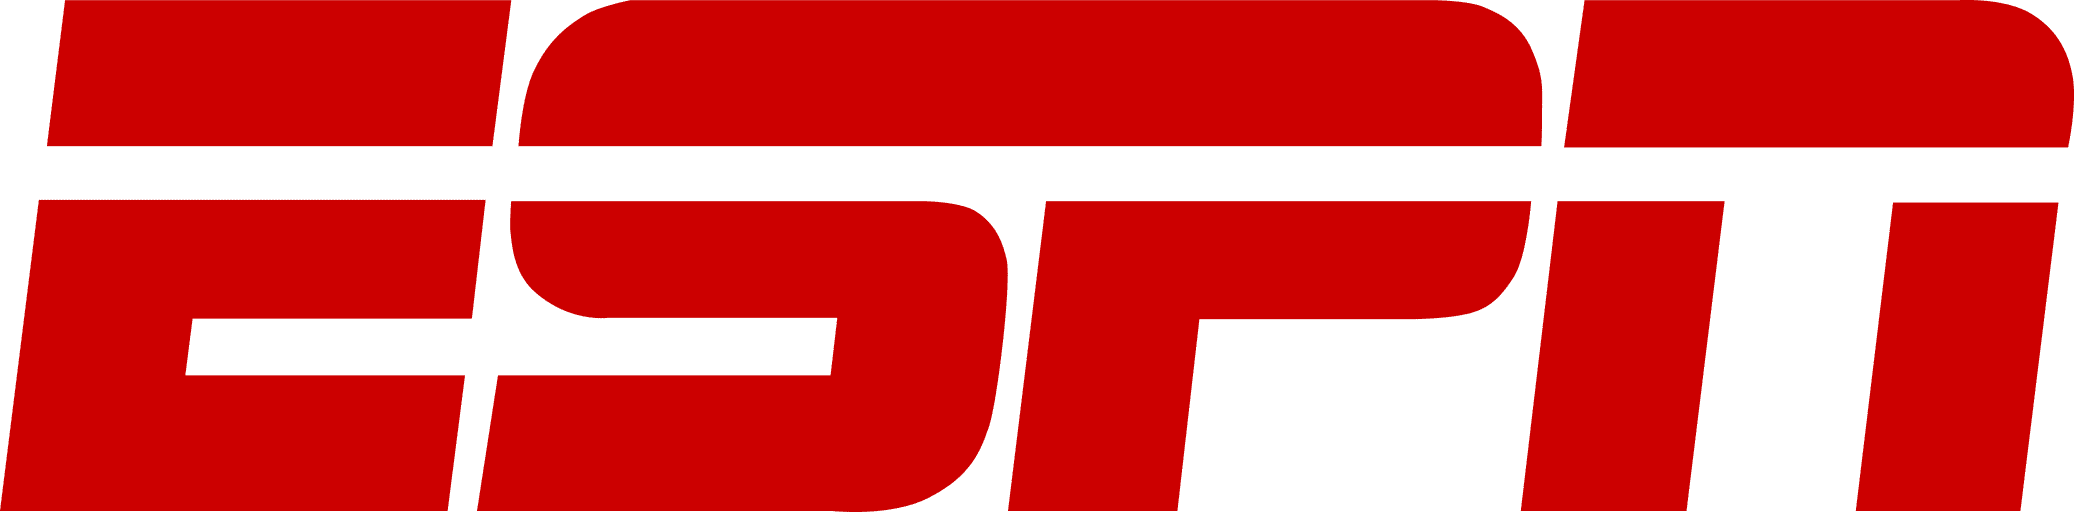 espn by Interactive Entertainment Group, Inc.